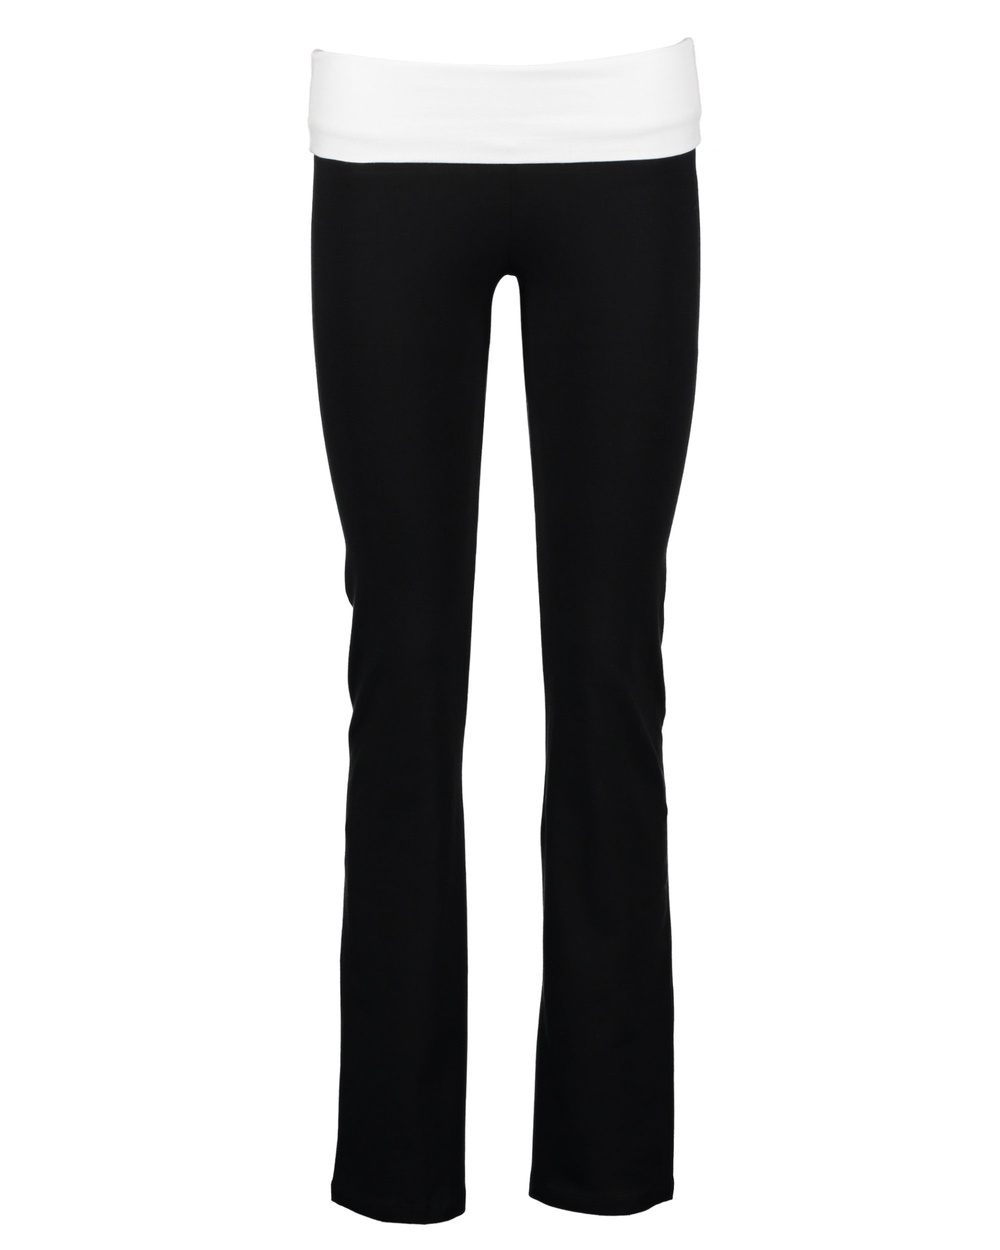 Enza® 16579 Ladies Fold Over Yoga Pant - Wholesale Apparel and Supplies